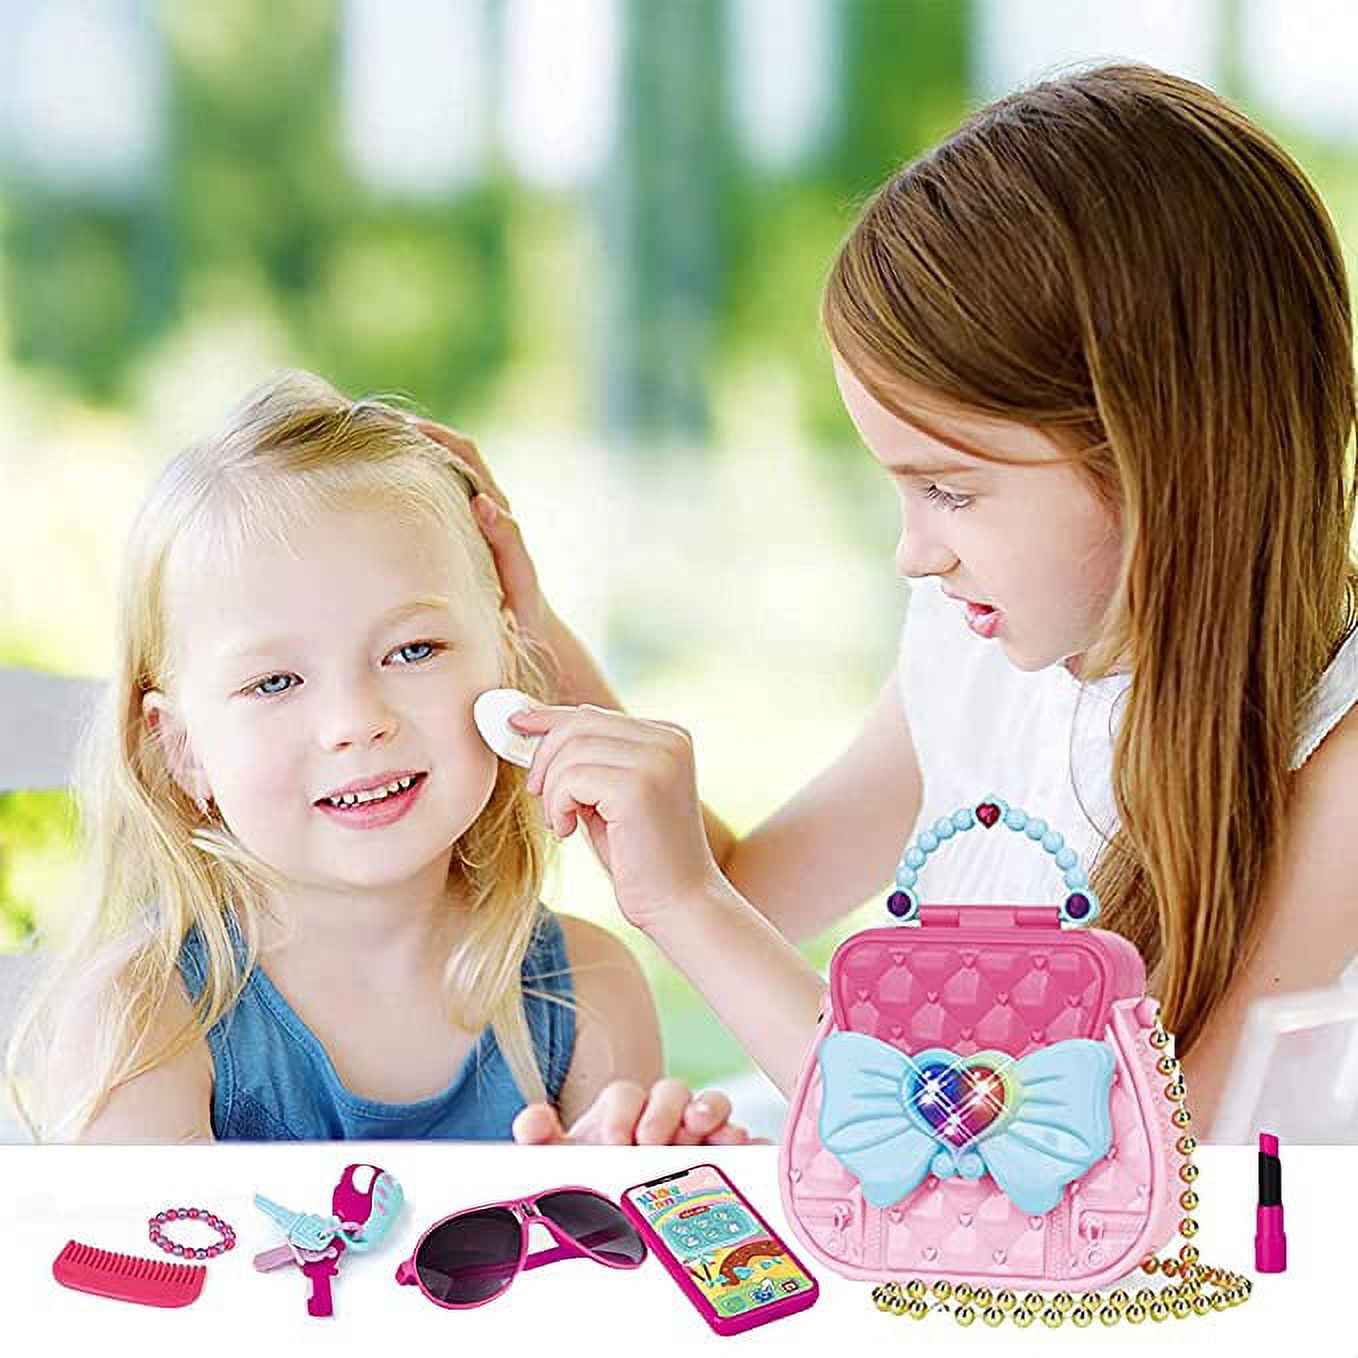 Amazon.com: 21 Pcs Pretend Purse for Little Girls, My First Play Purses Toy  Set for Princess with Handbag, Accessories, Make up Toys, Birthday for Baby  Toddler Kid Girl Ages 1 2 3